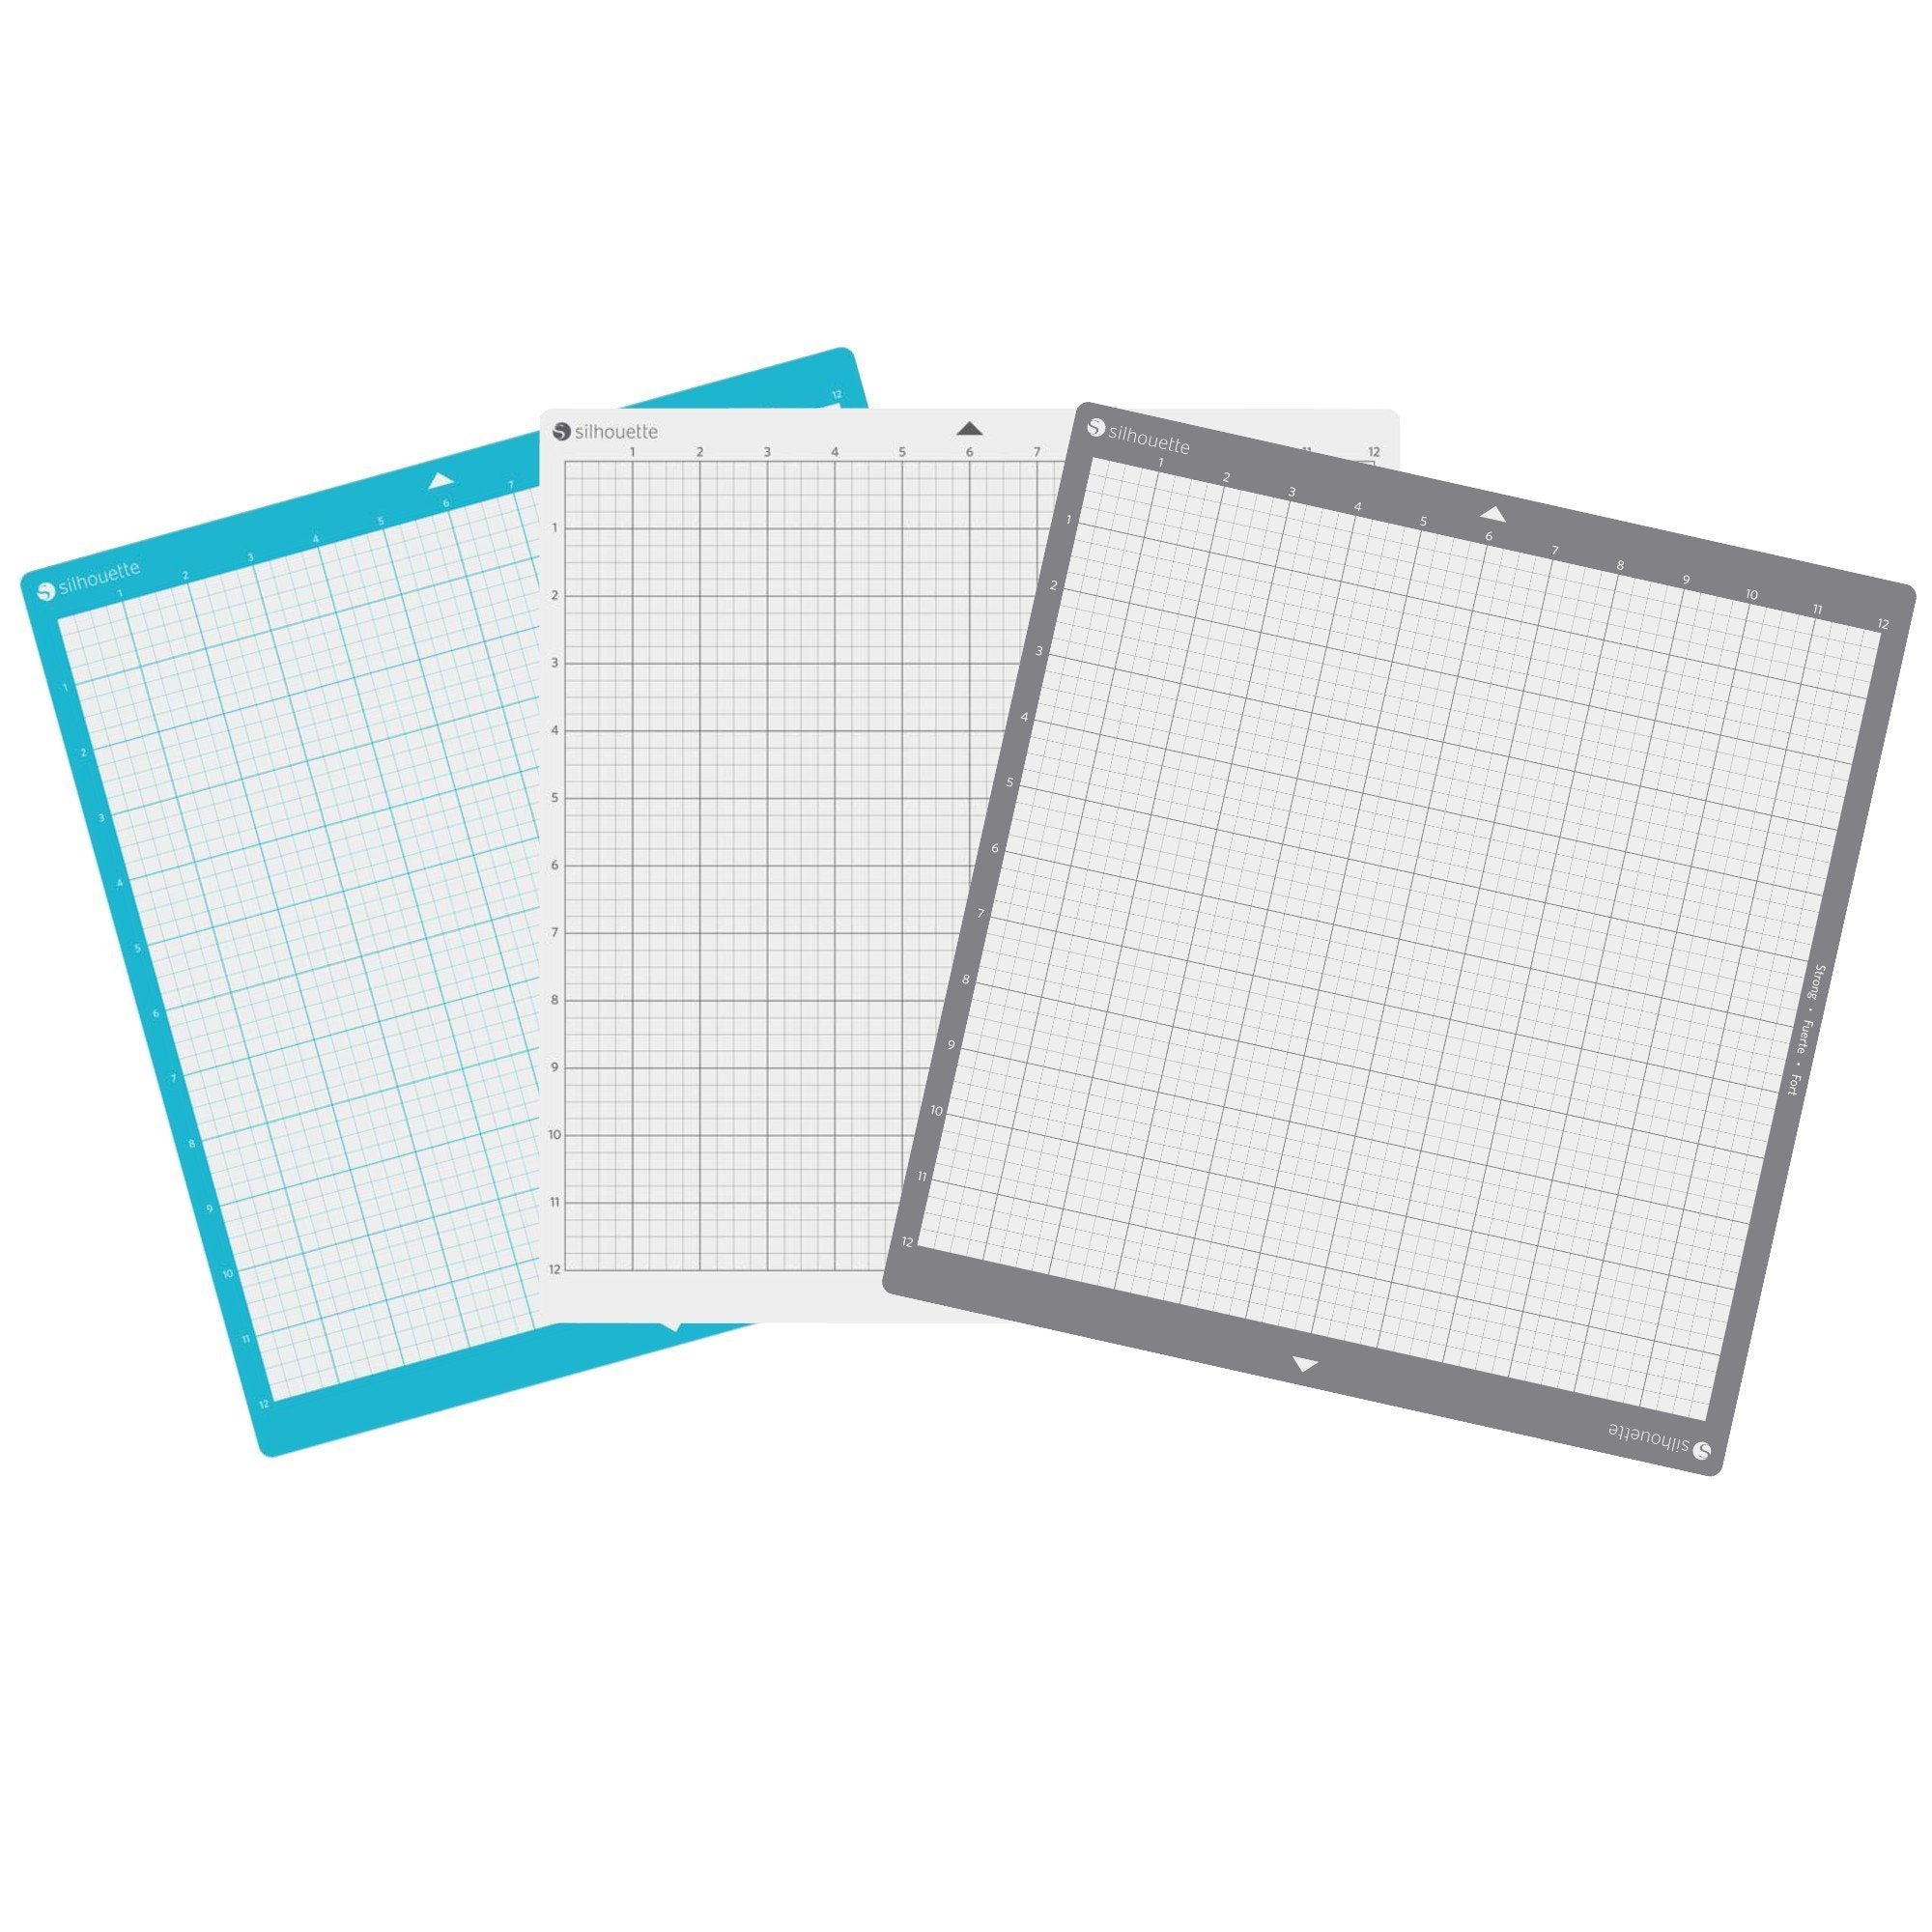  REALIKE 12x24 Cutting Mat for Silhouette Cameo 4/3/2/1(3 Mats -  StandardGrip, LightGrip, StrongGrip), Variety Adhesive Cricket Cut Mats  Replacement Accessories for Silhouette Cameo